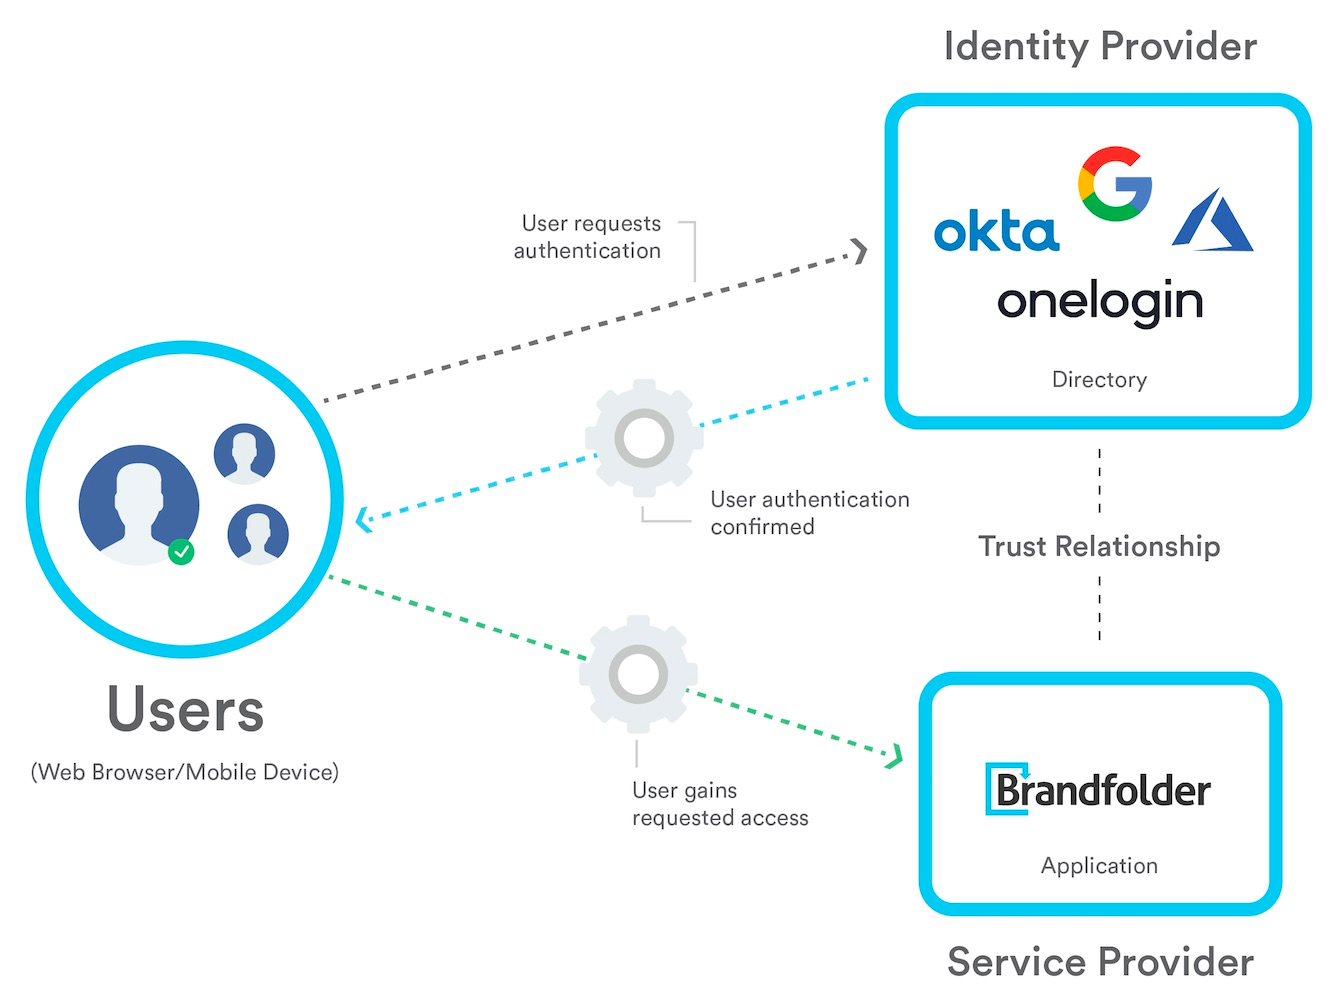 A diagram showing the relationship between users, identity providers, and service providers.